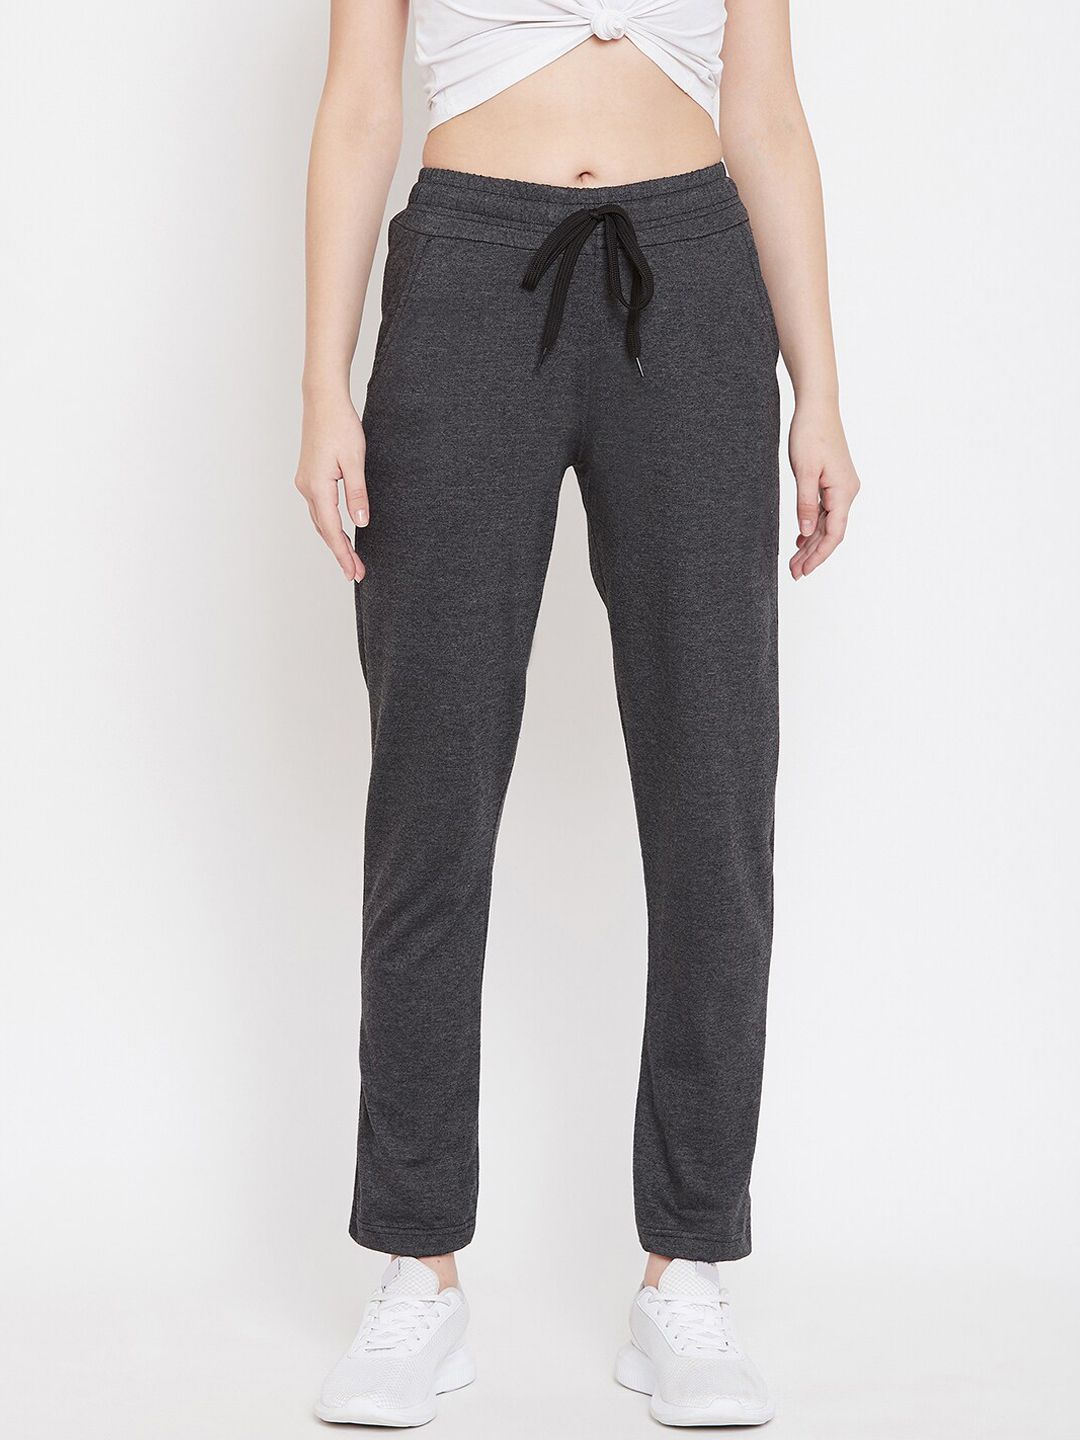 StyleStone Women Grey Solid Track Pants Price in India